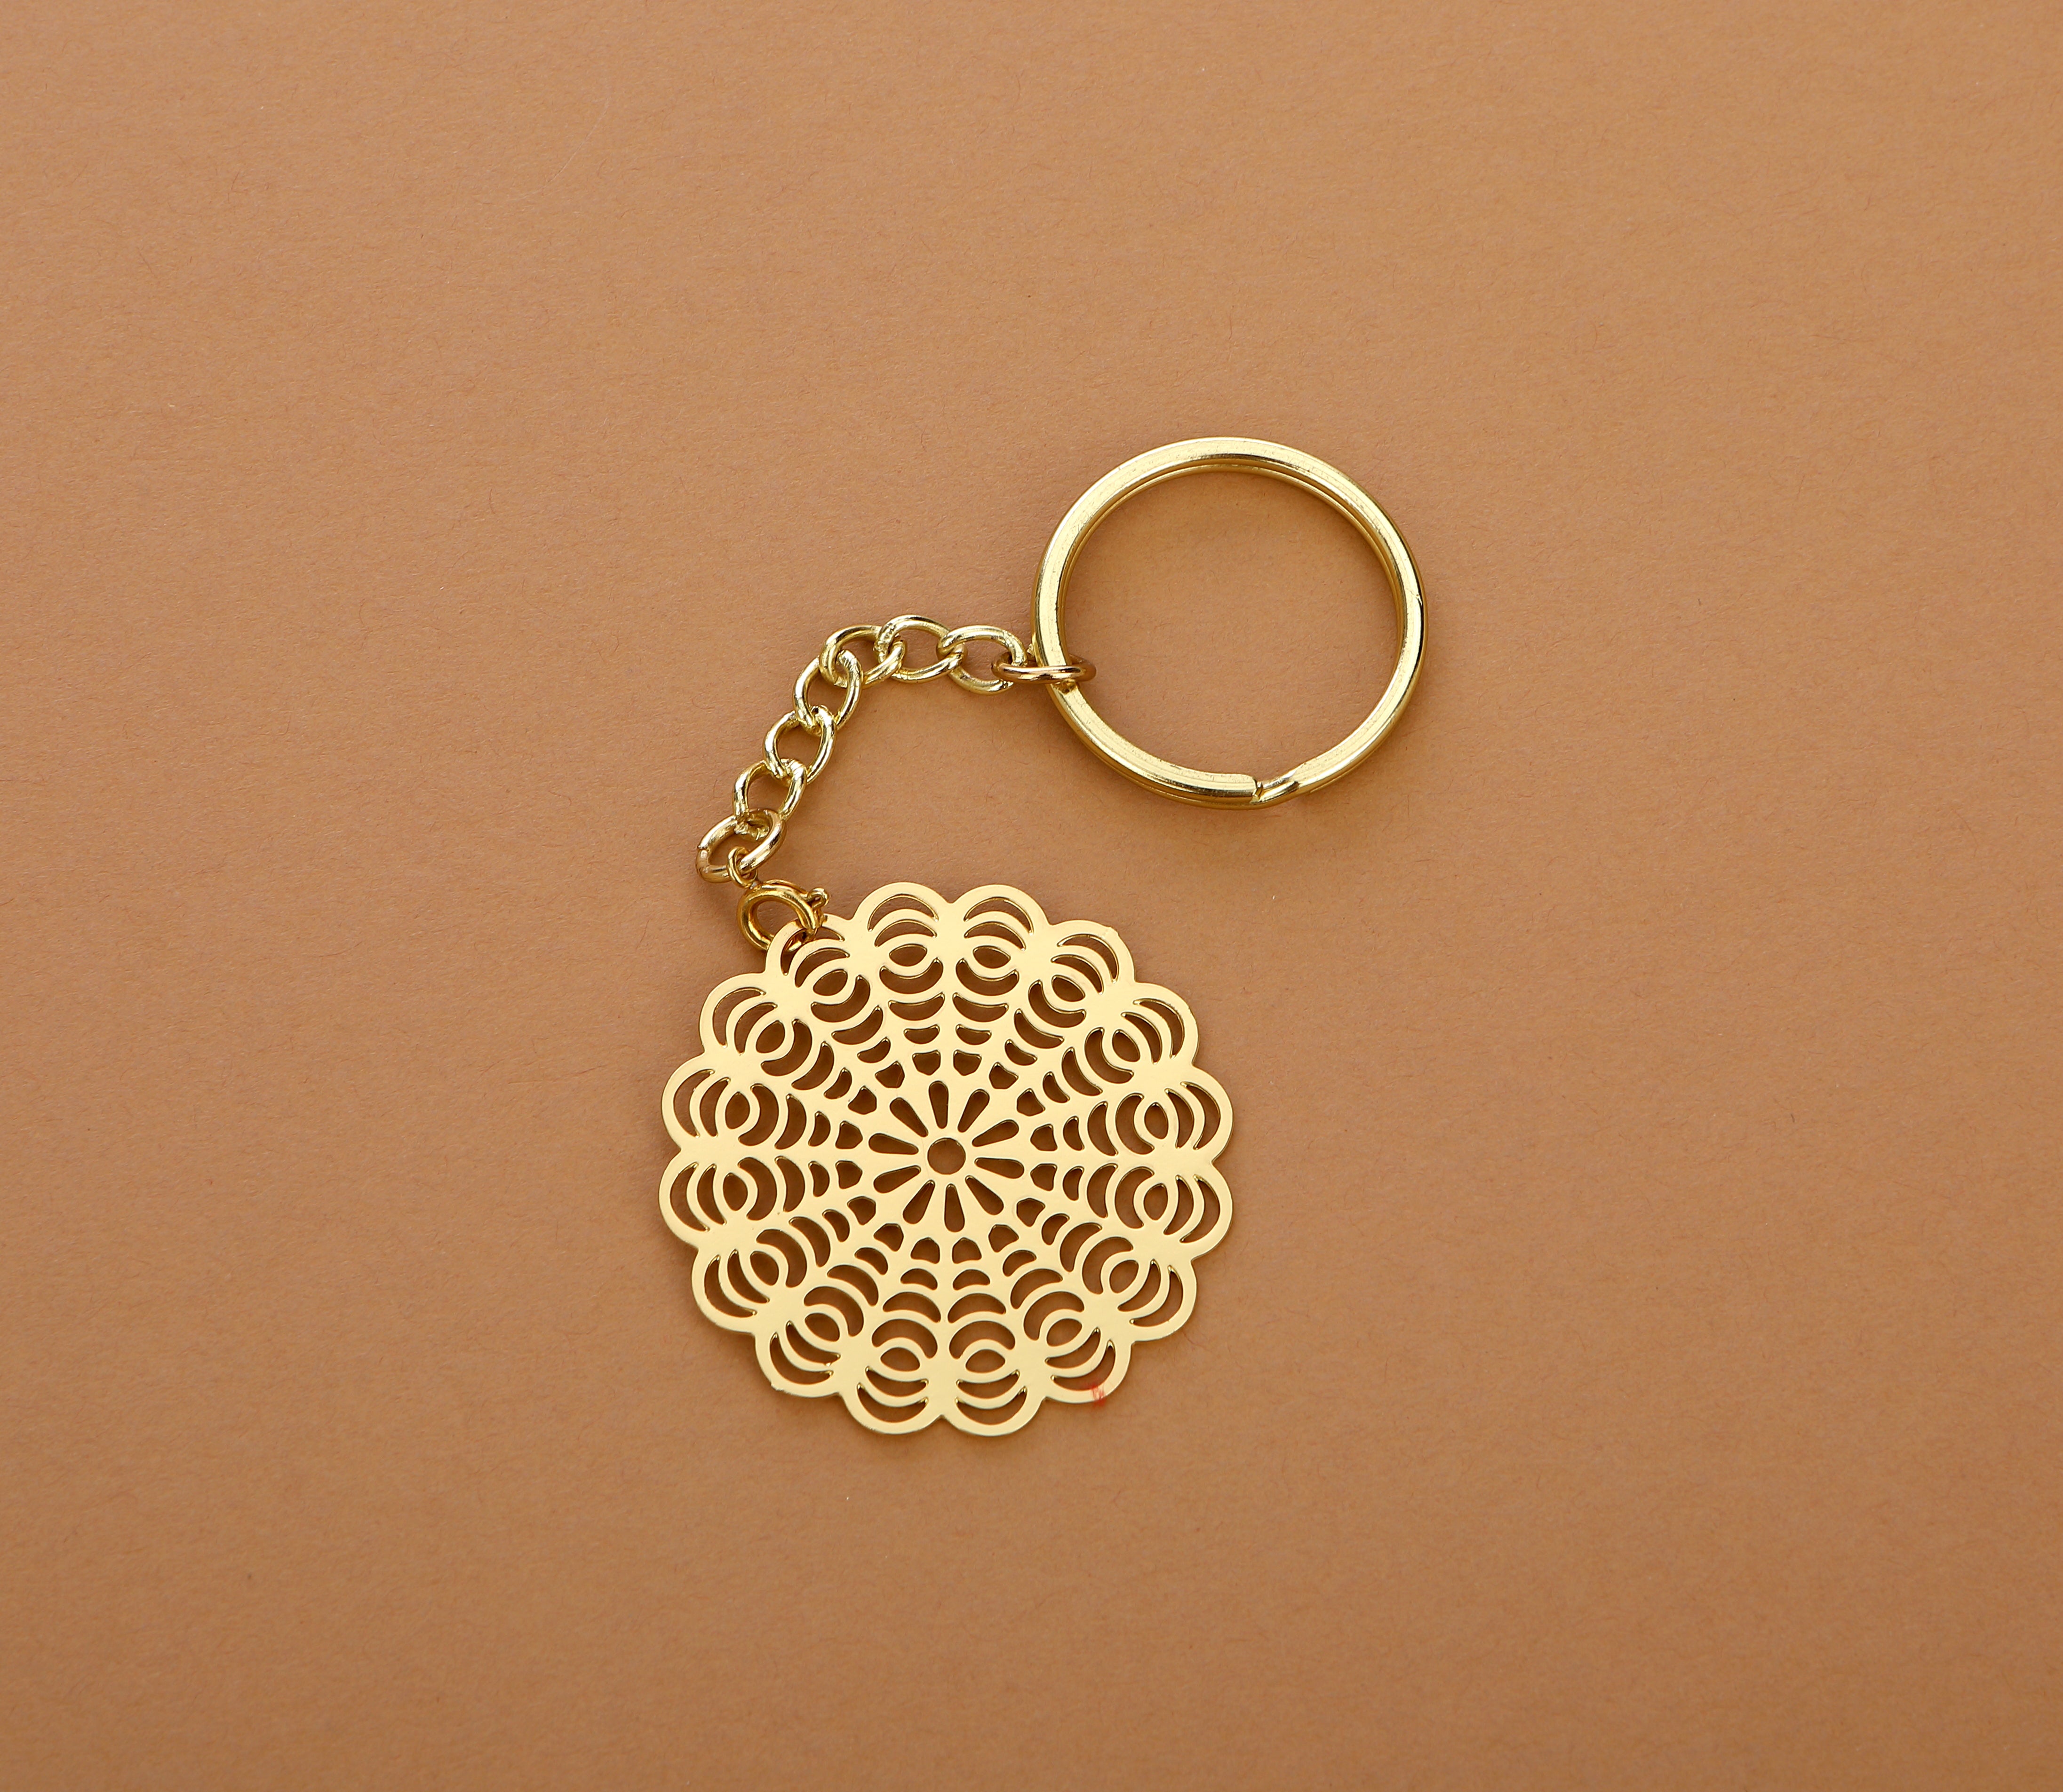 Adoraa's Floral Brass Key Chain Ring in Golden Finish